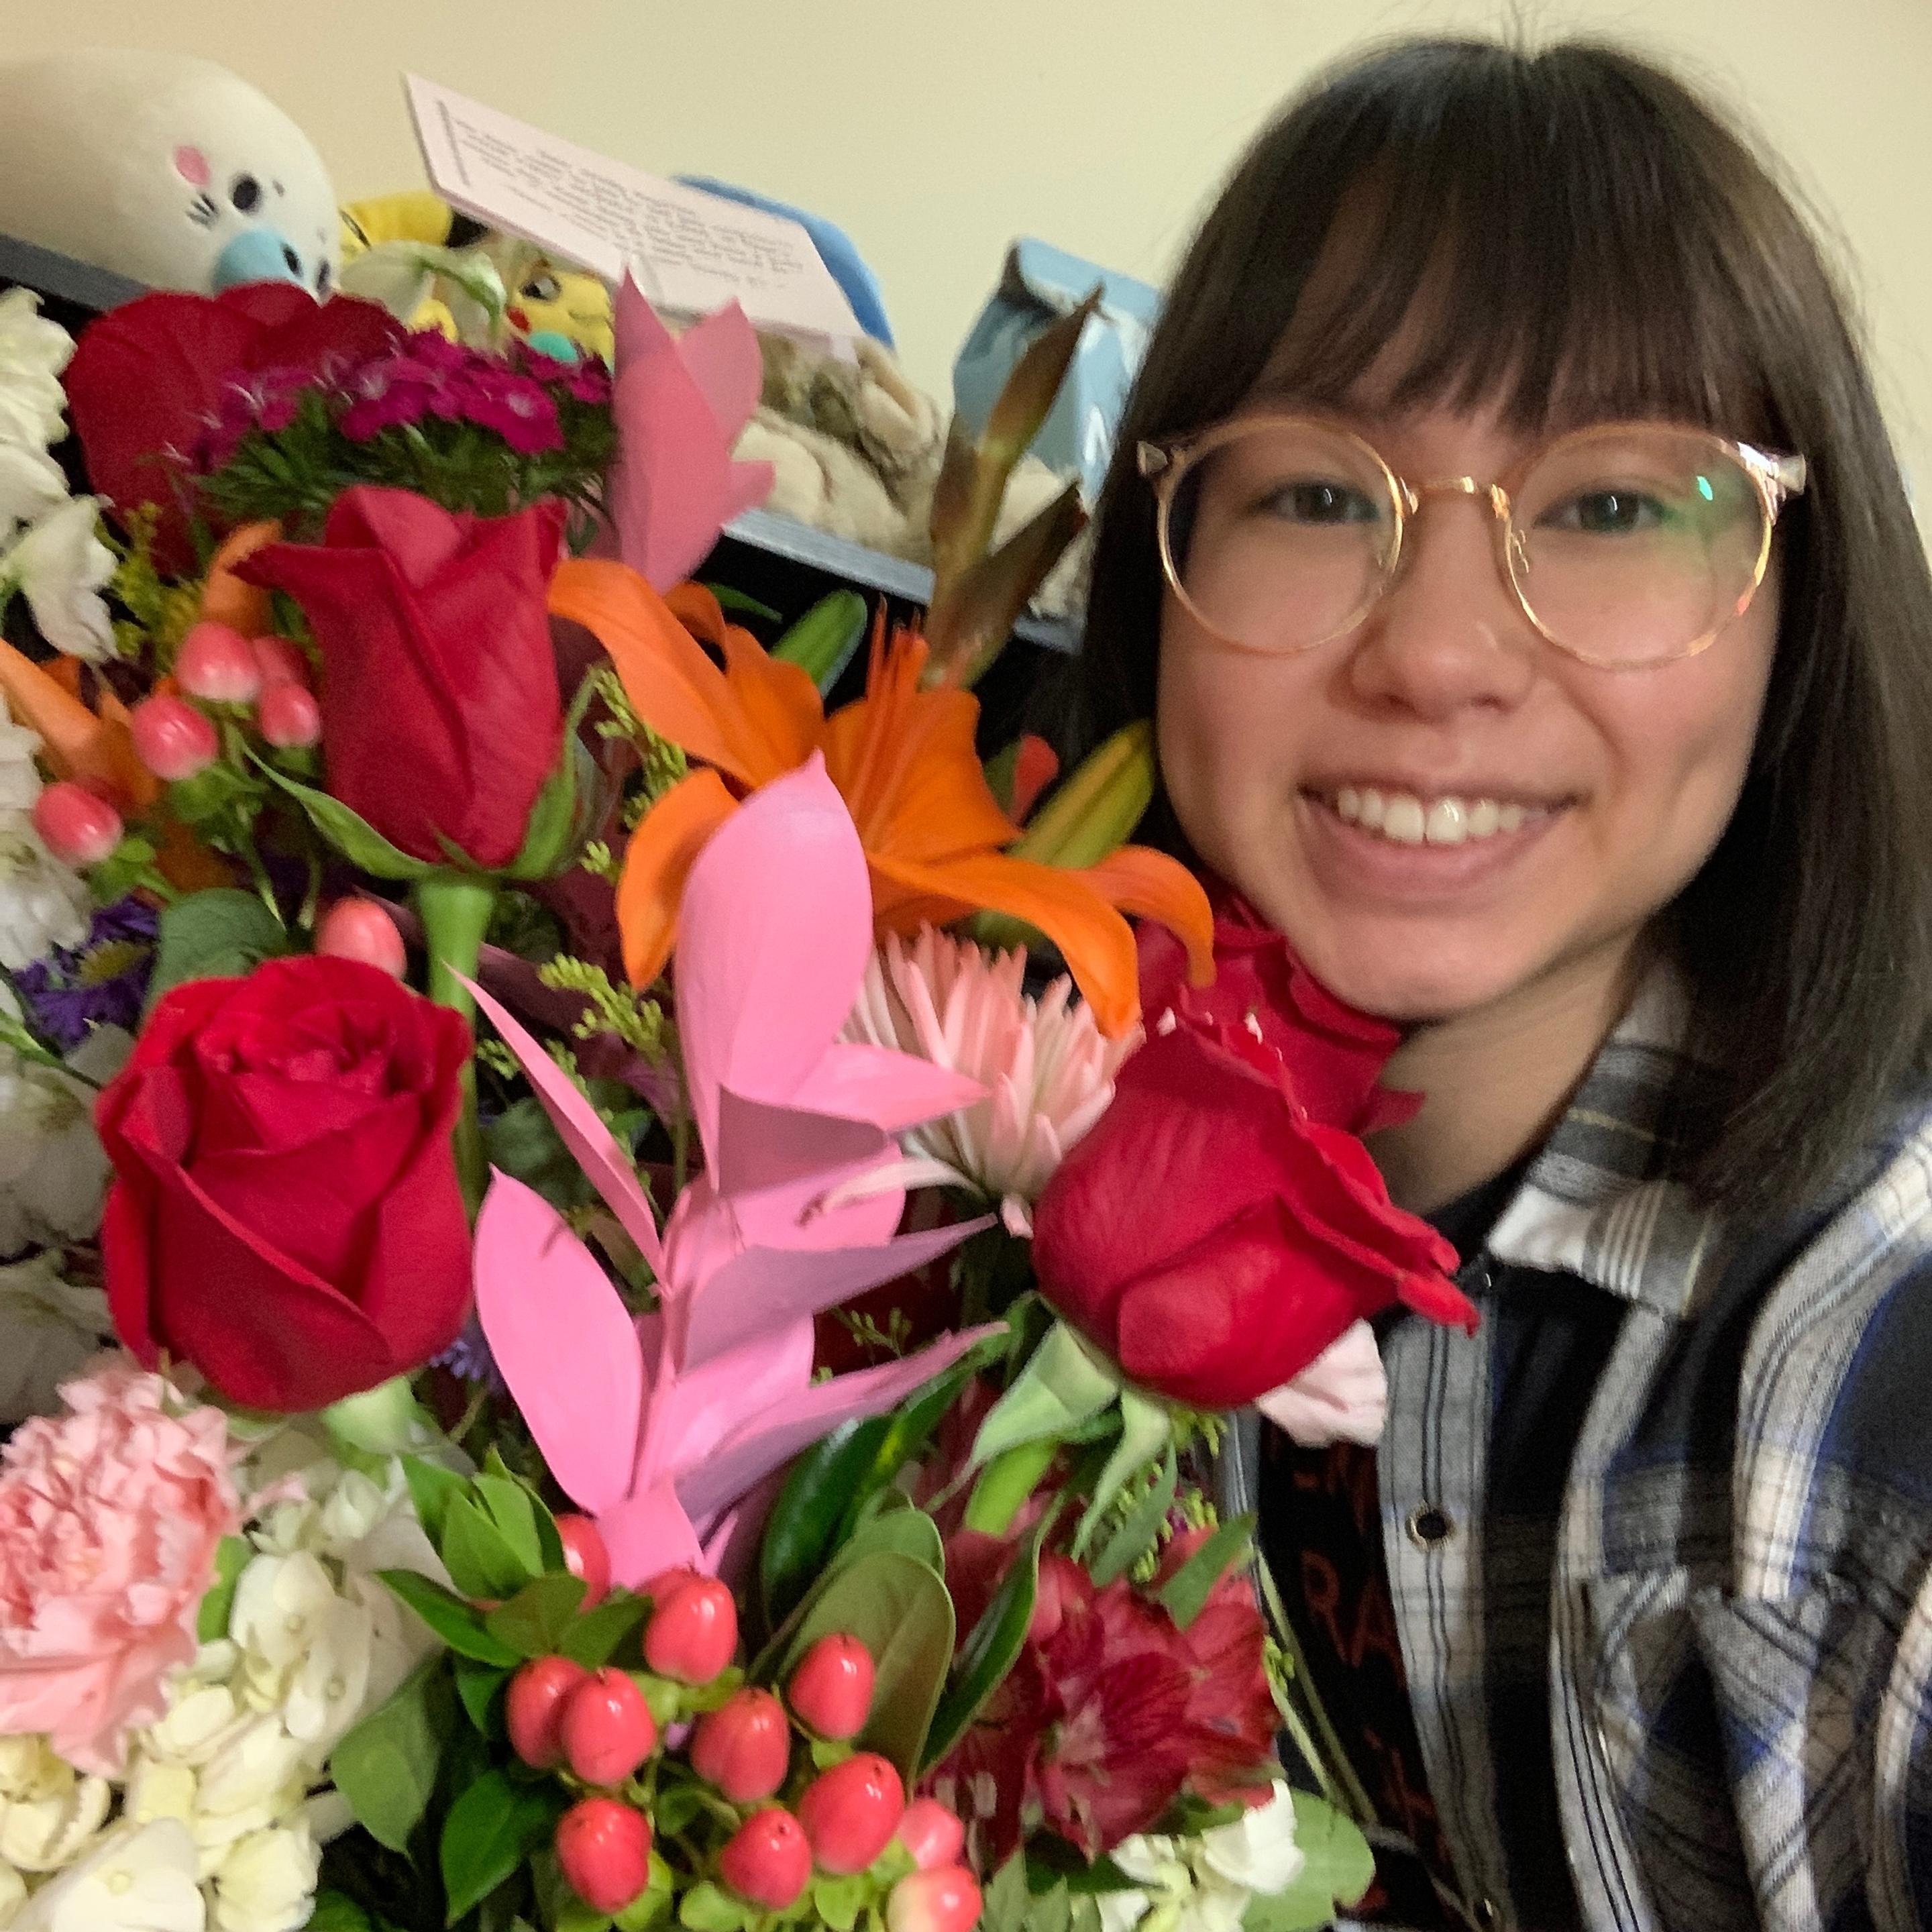 Woman with glasses next to a big floral arrangement with pink and red flowers